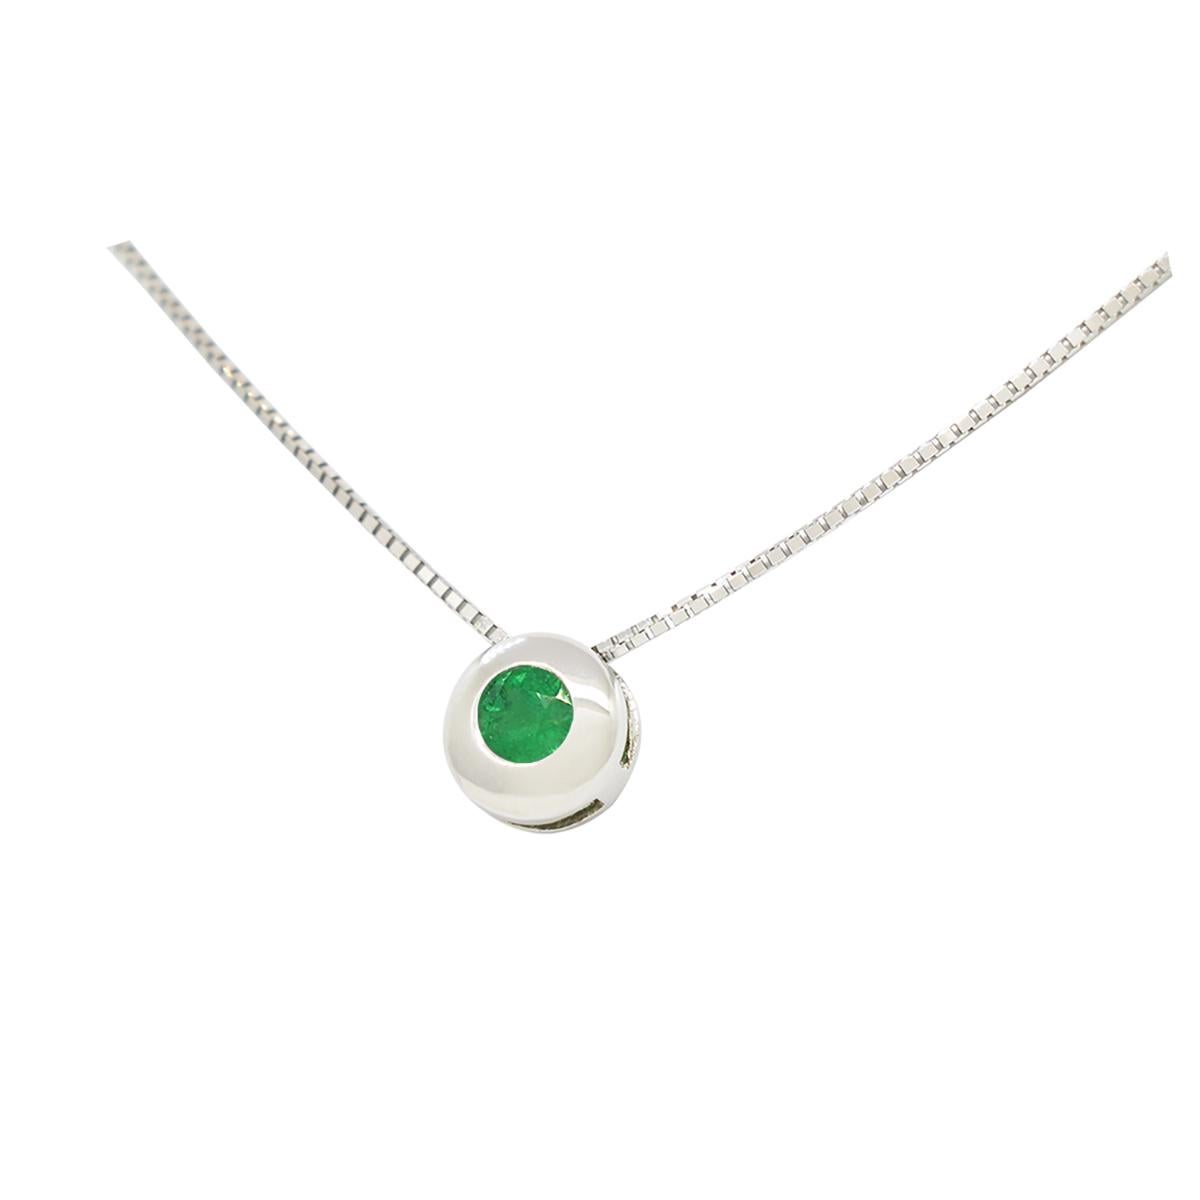 Round Cut Circular Emerald Necklace in White Gold with 0.25 Carats Green Colombian Emerald For Sale